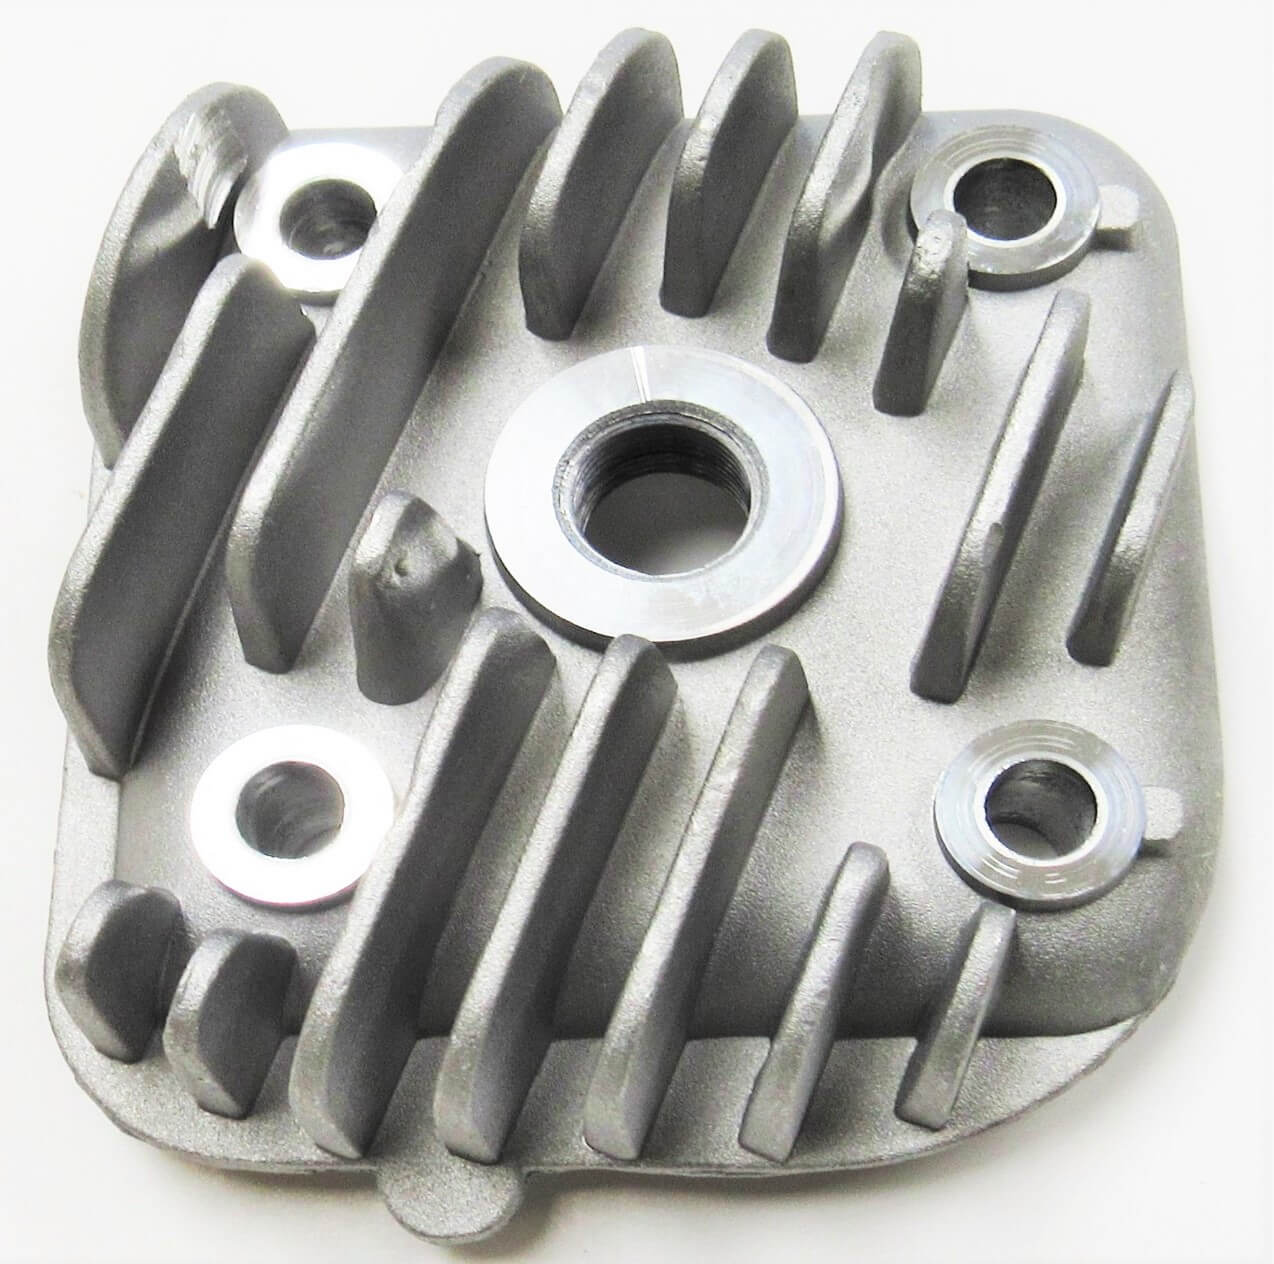 Cylinder Head 54mm 100cc 2 Stroke Fits Most 2 Stroke ATVs and Scooters